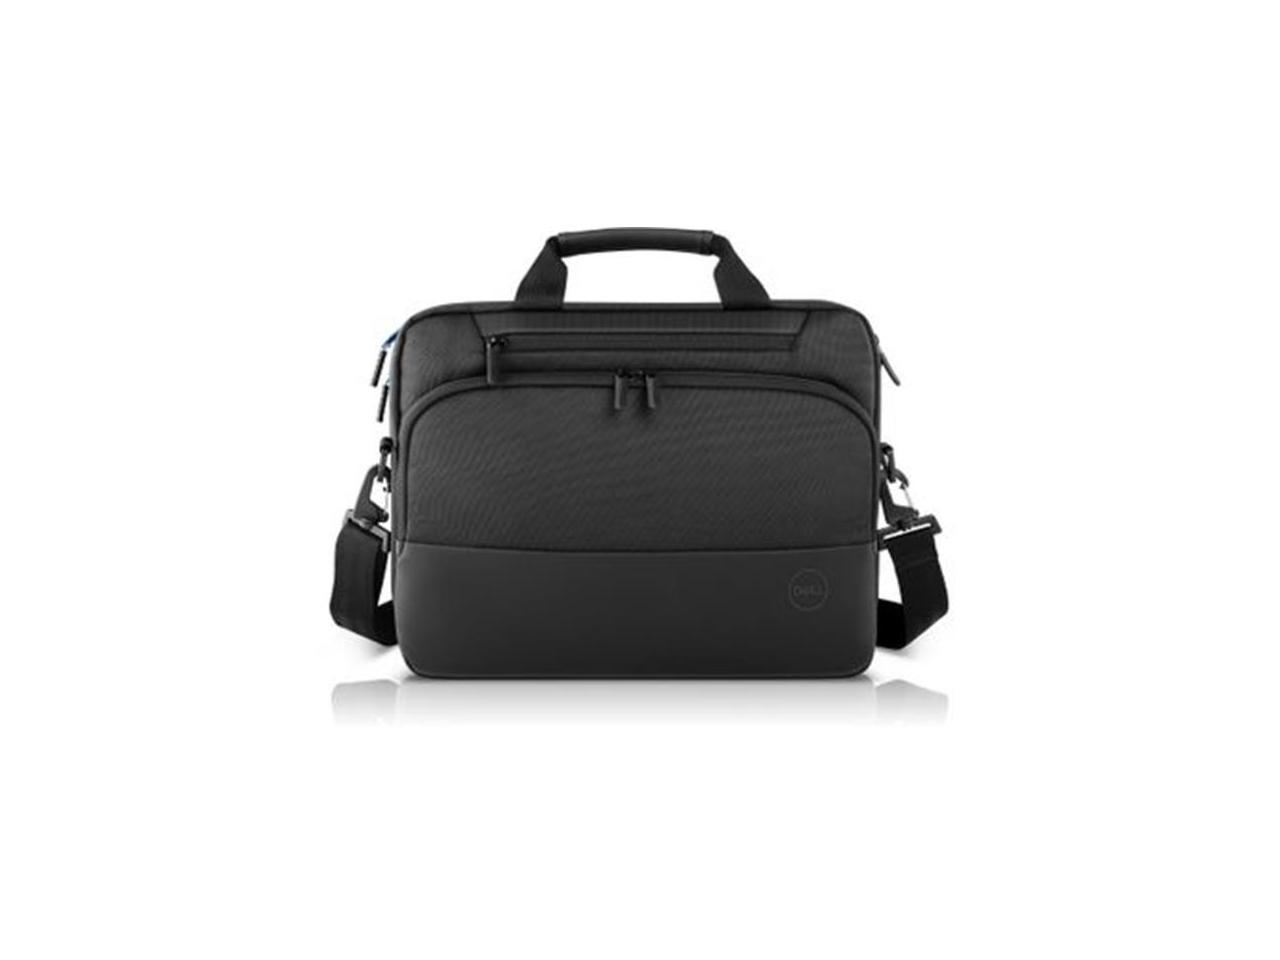 Dell Pro Briefcase 14 (PO1420C), Made with an Earth-Friendly Solution-Dyeing Process and Shock-Absorbing EVA Foam That Protects Your Laptop from Impact.